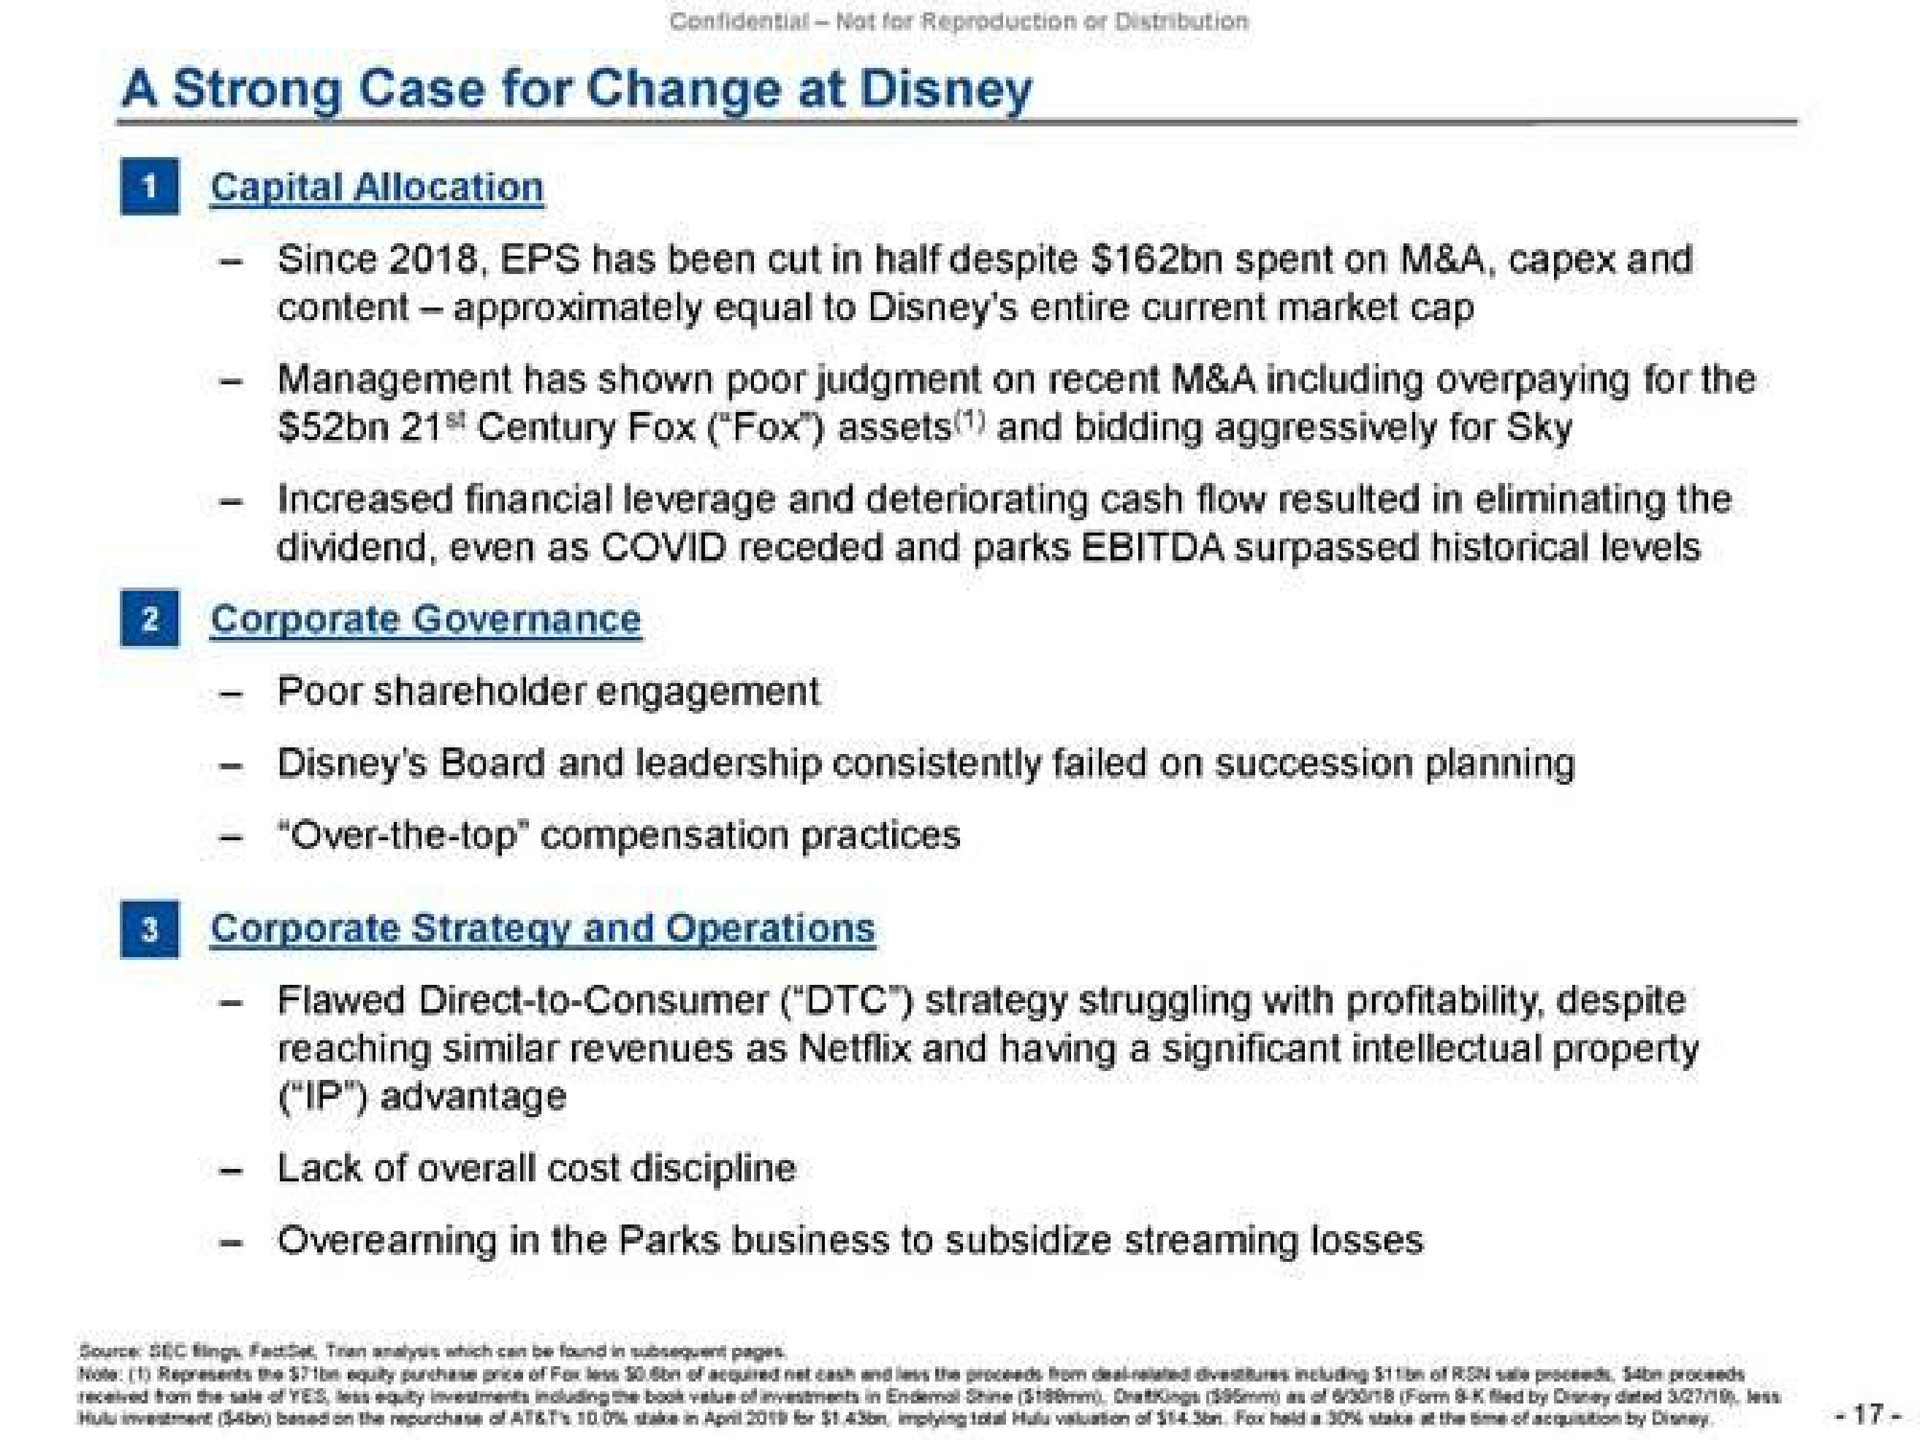 a strong case for change at capital allocation since has been cut in half despite spent on a and content approximately equal to entire current market cap management has shown poor judgment on recent a including overpaying for the century fox fox assets and bidding aggressively for sky increased financial leverage and deteriorating cash flow resulted in eliminating the dividend even as covid receded and parks surpassed historical levels fra corporate governance poor shareholder engagement board and leadership consistently failed on succession planning over the top compensation practices corporate strategy and operations reaching similar revenues as and having a significant intellectual property advantage lack of overall cost discipline in the parks business to subsidize streaming losses | Trian Partners